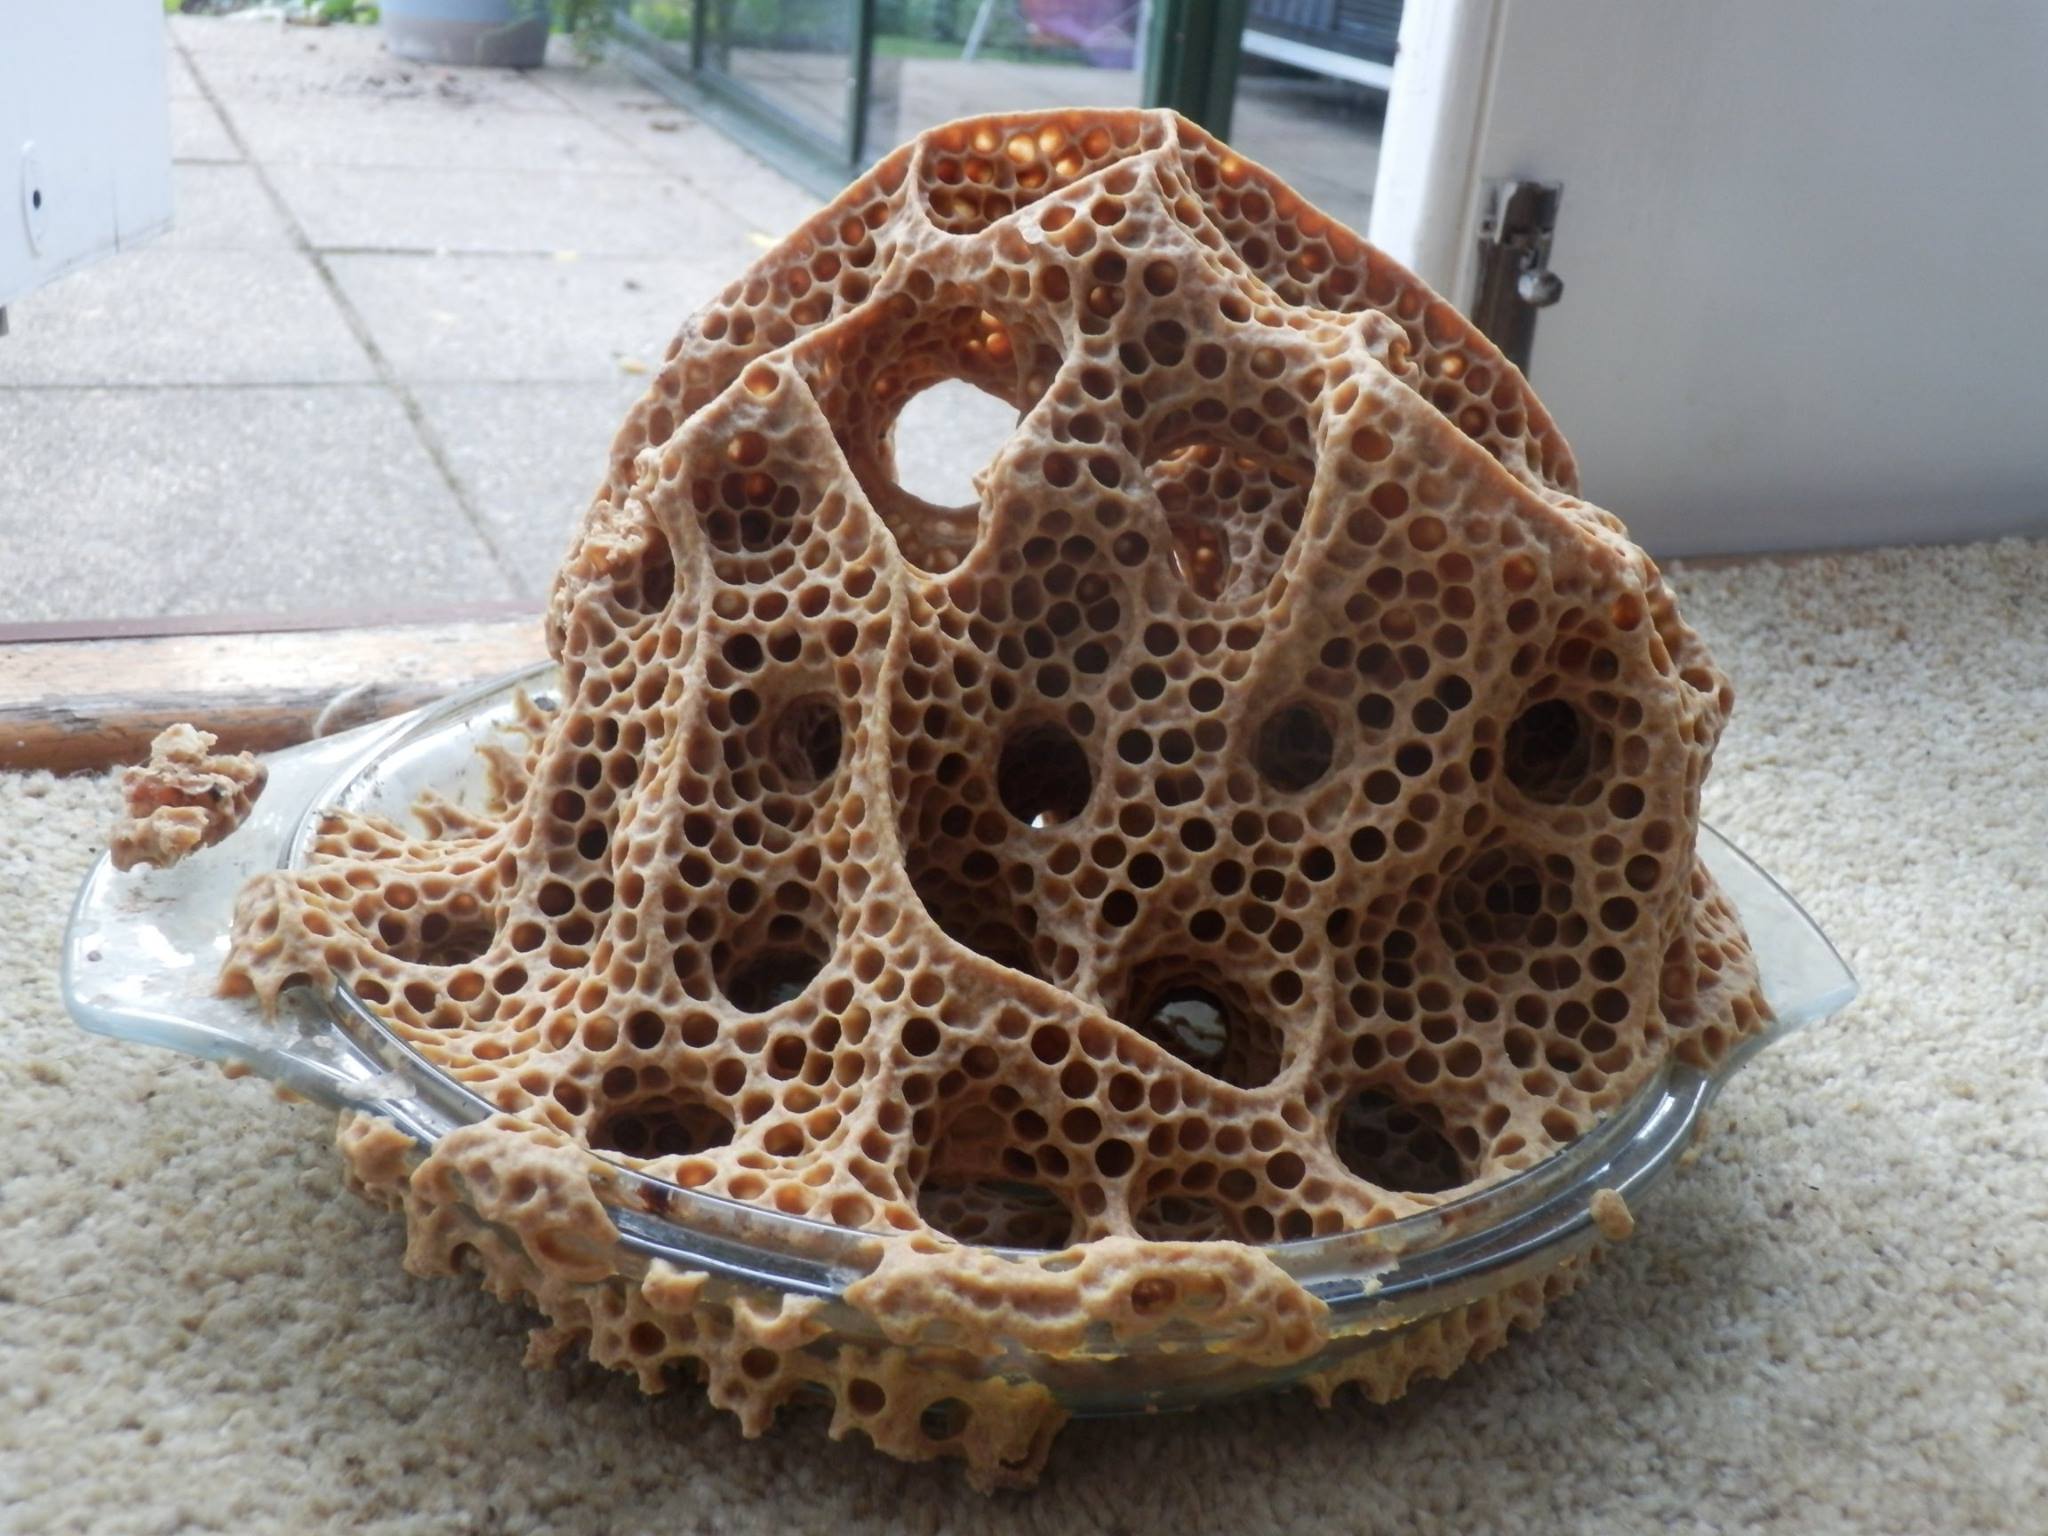 Bees made a nest in a glass bowl.